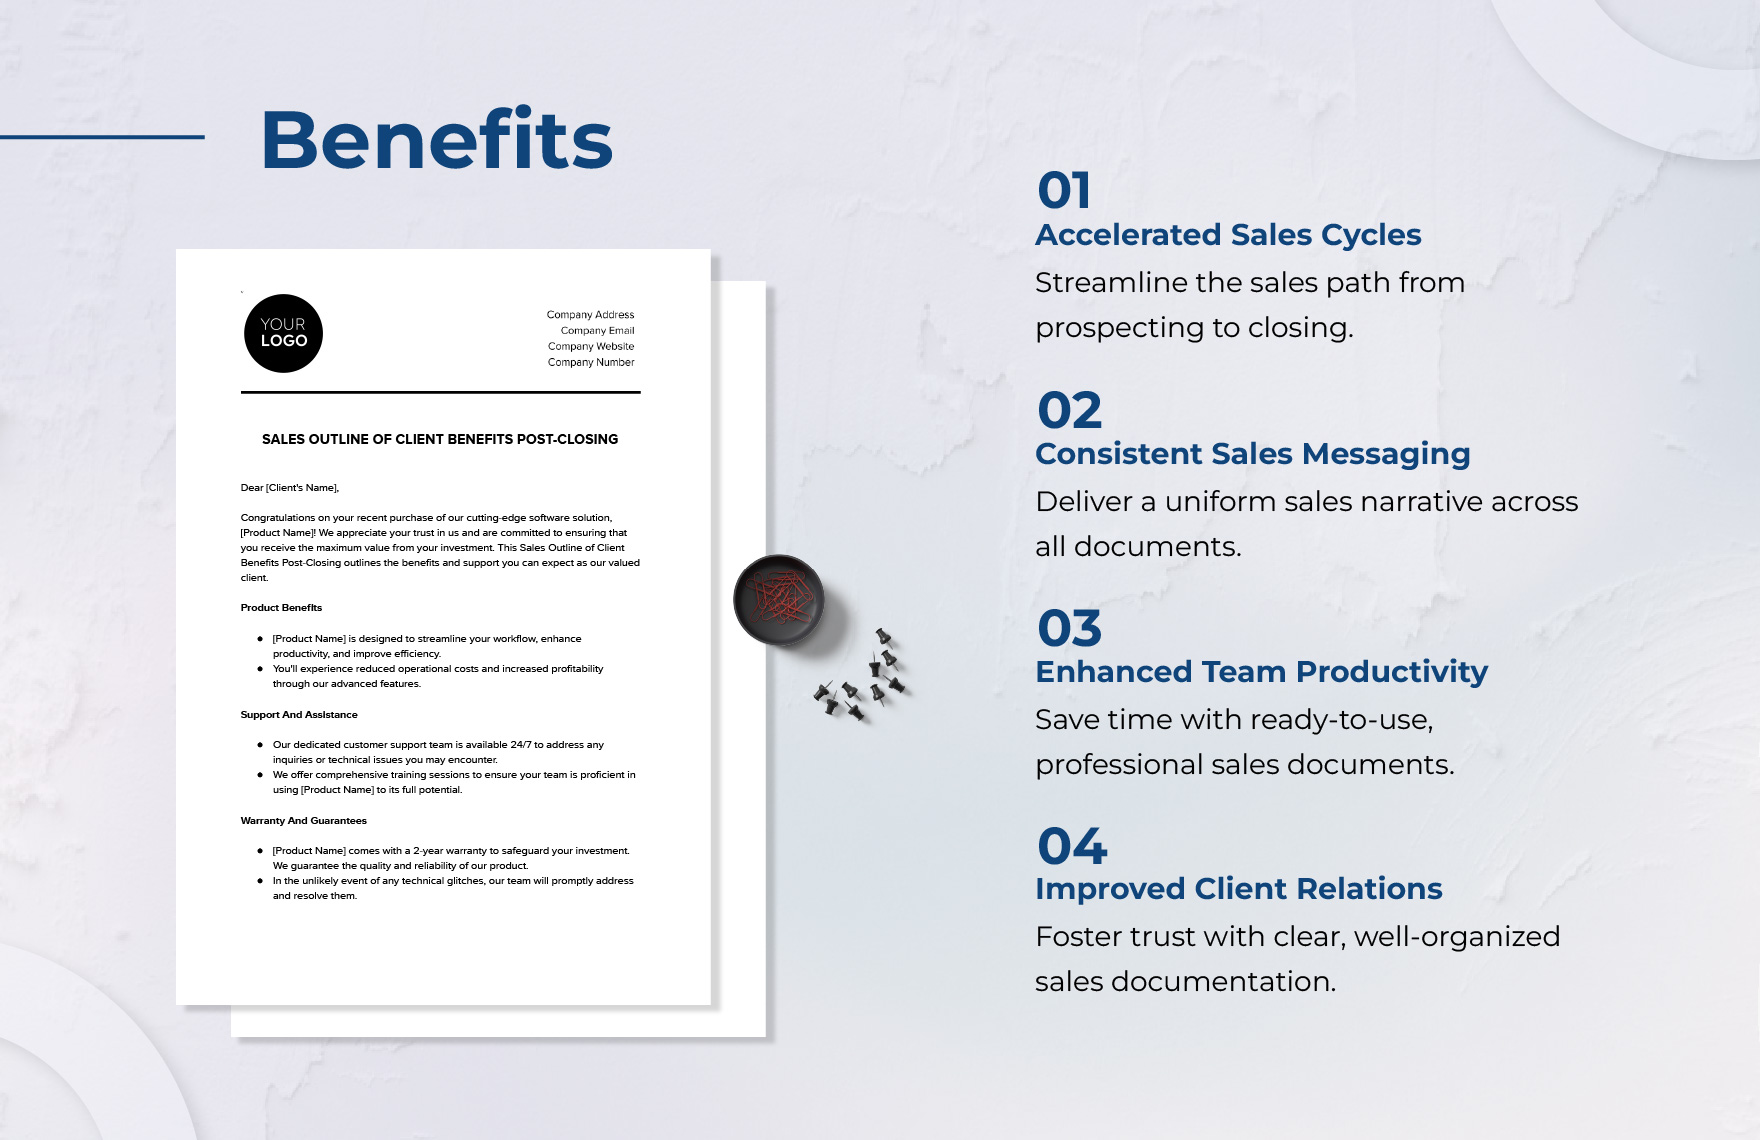 Sales Outline of Client Benefits Post-Closing Template